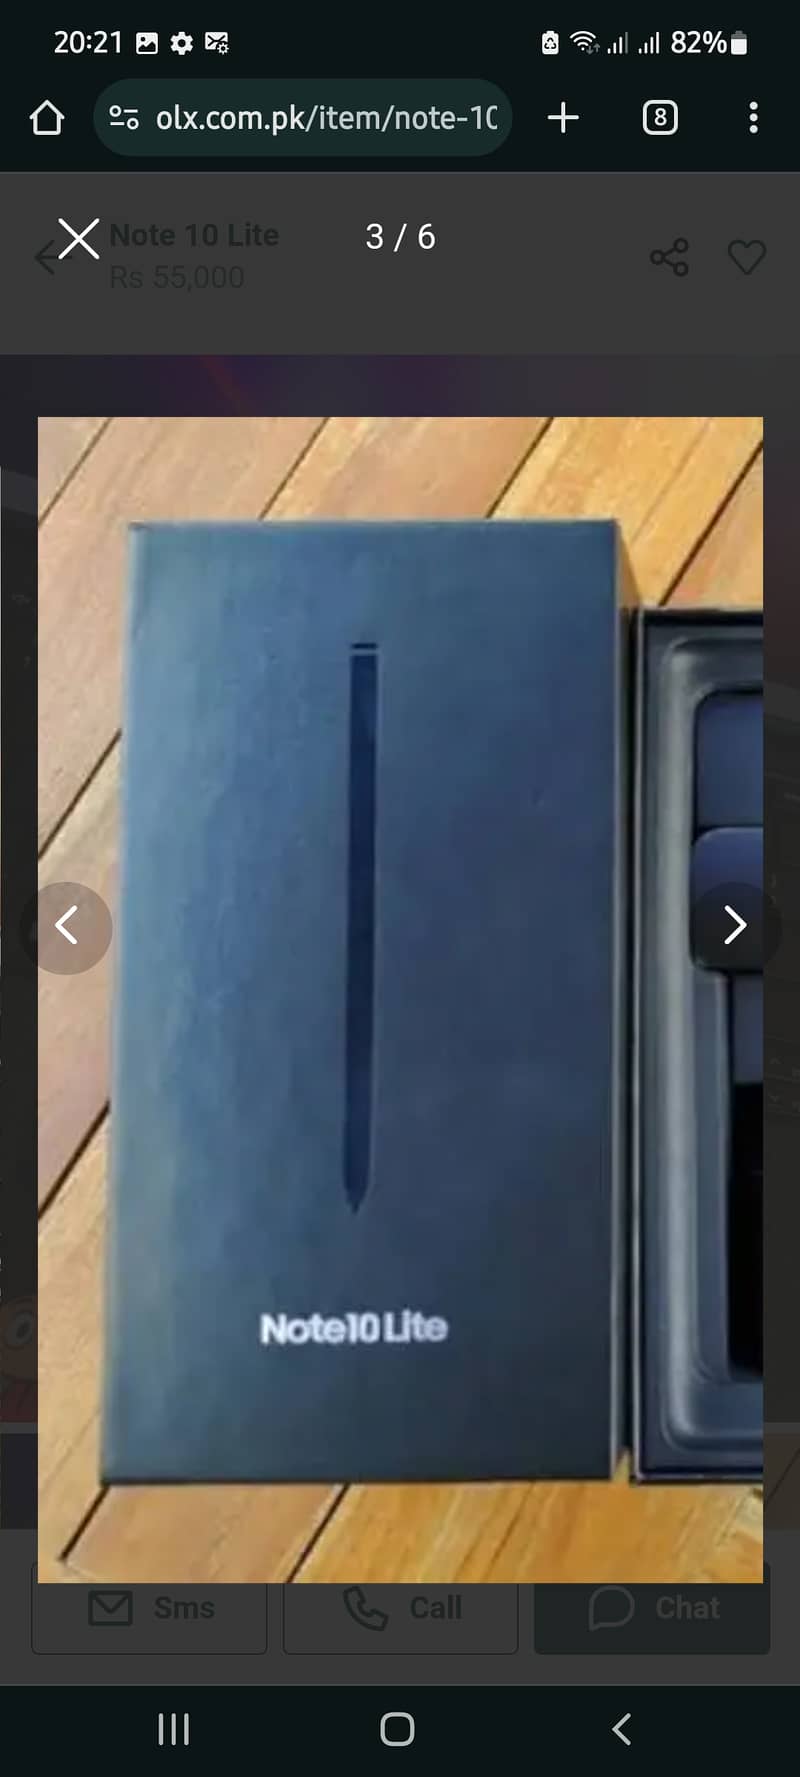 I want to sell my Samsung notebook 10 lite @ 57000ruppes fnf 1